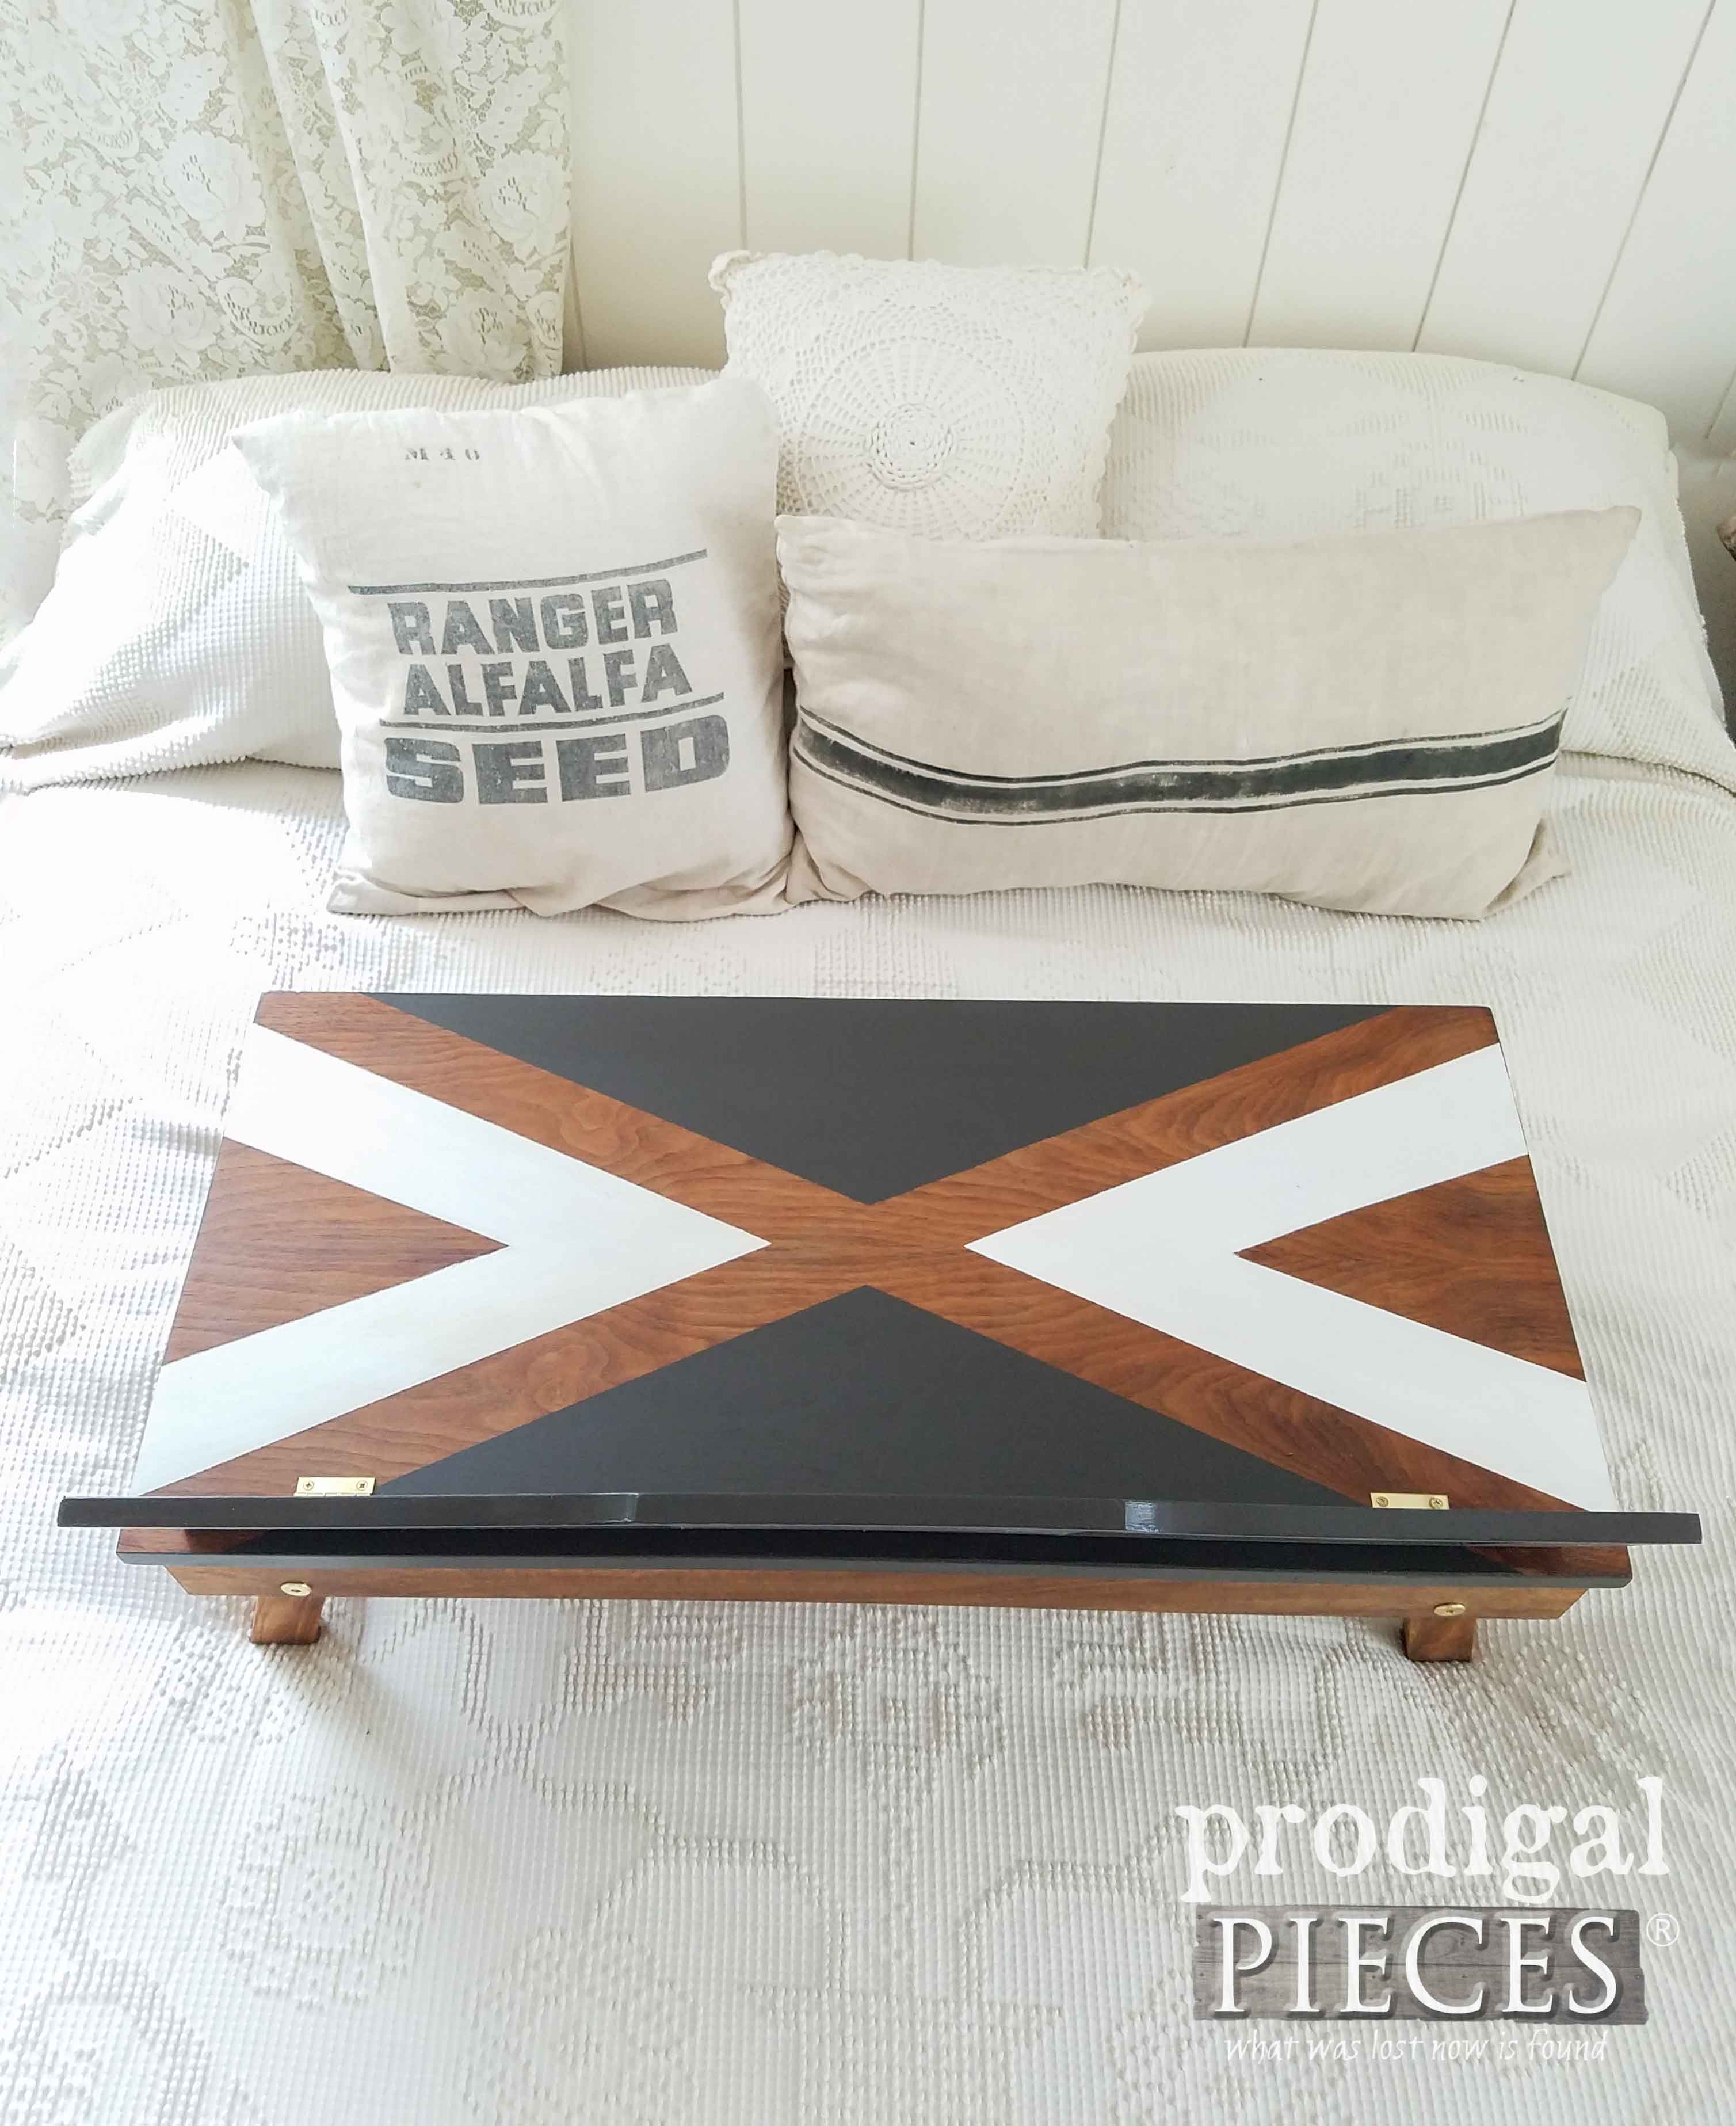 Repurposed Piano Bench becomes a Lap Desk with Storage by Prodigal Pieces | prodigalpieces.com